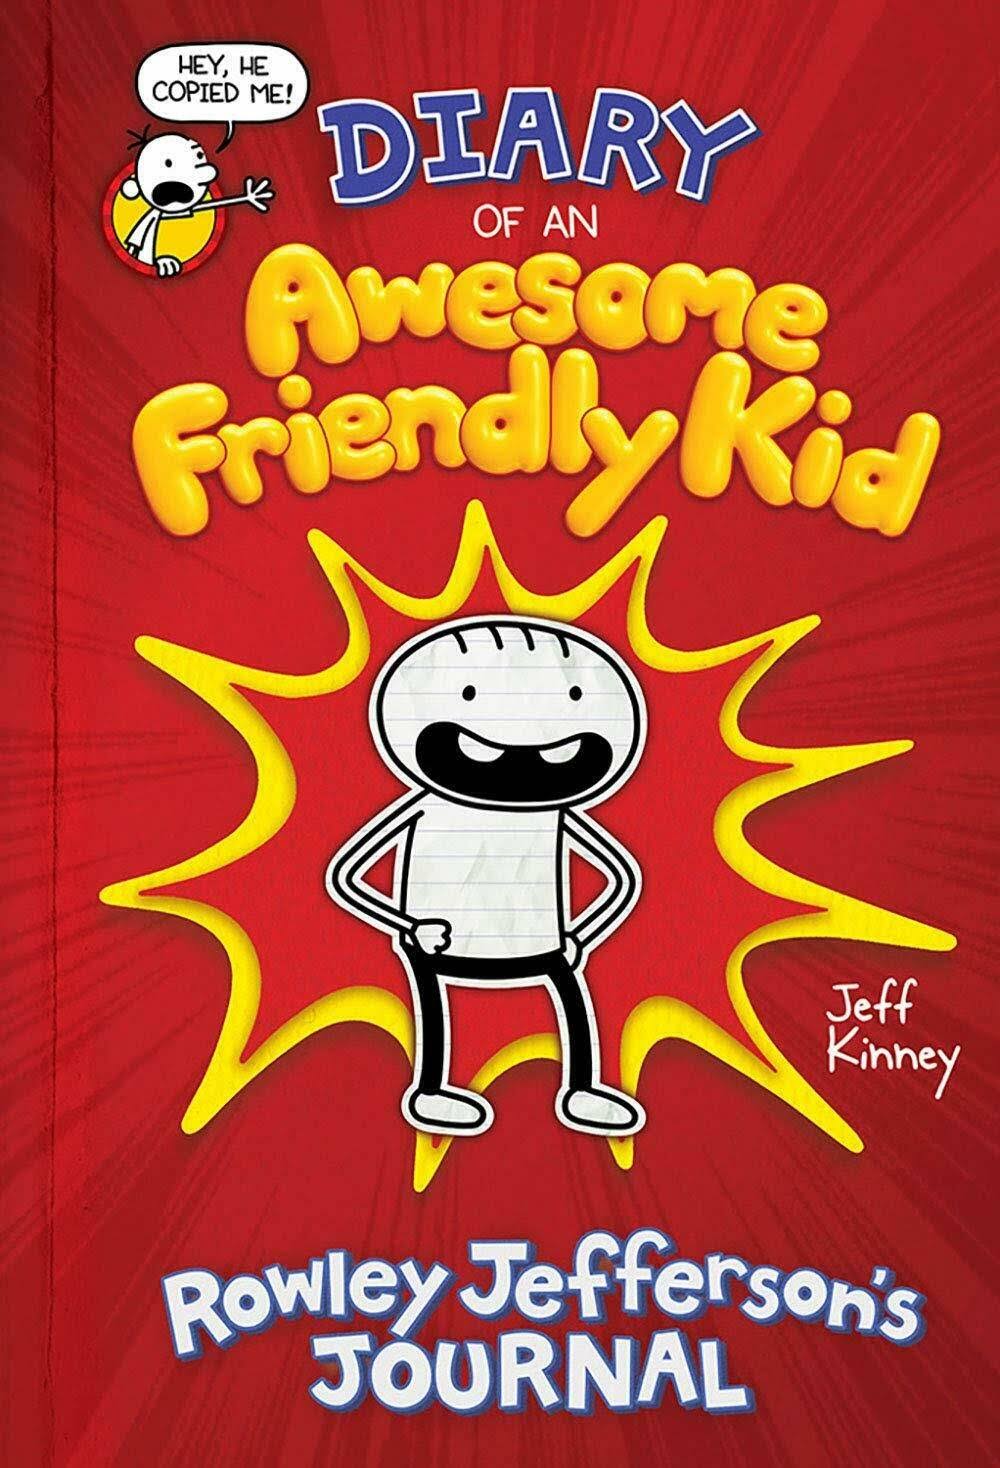 Diary of an Awesome Friendly Kid: Rowley Jefferson's Journal [Book]